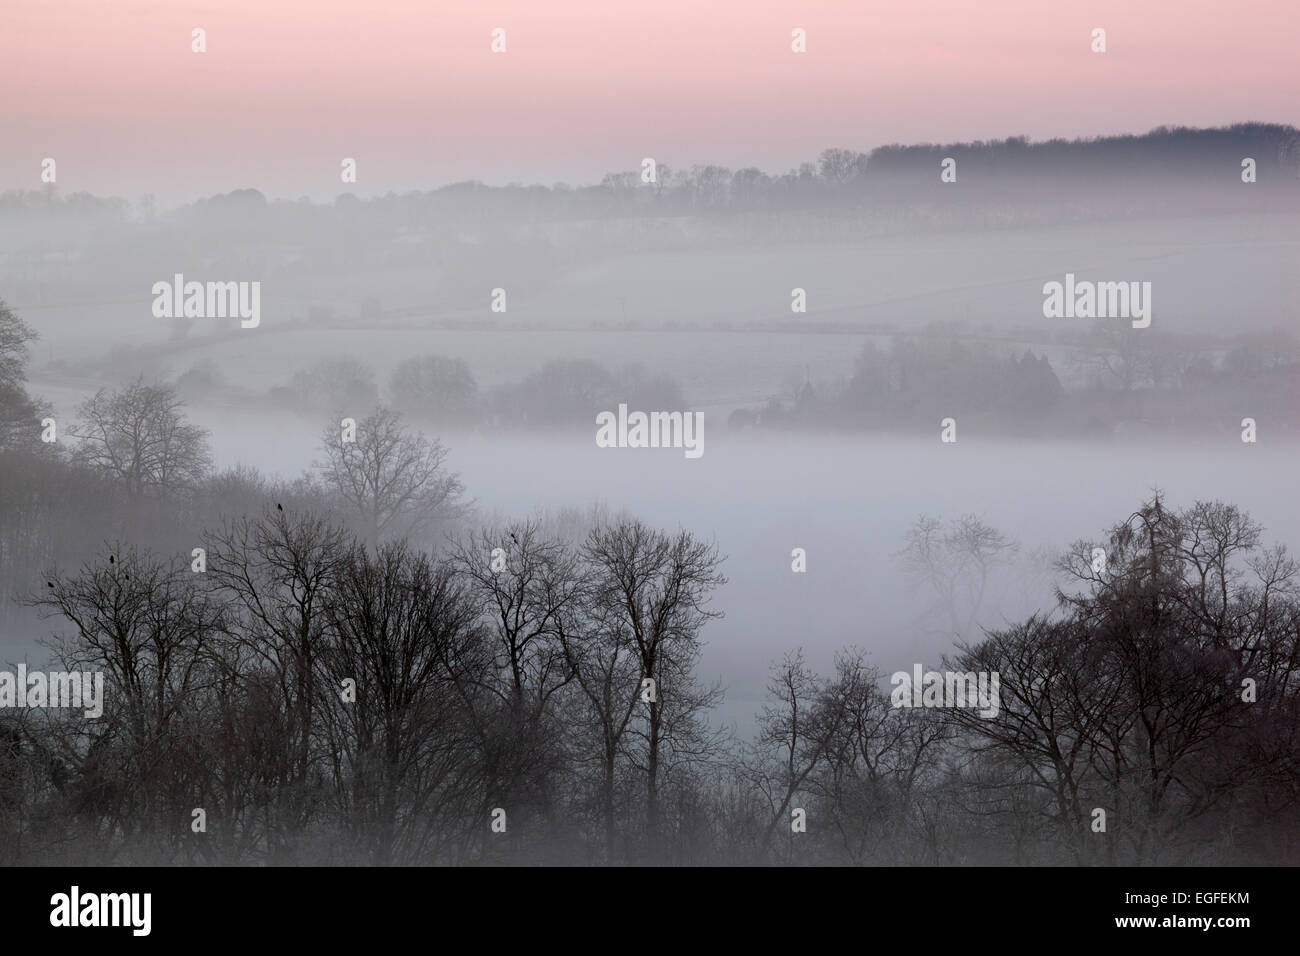 Winter landscape in dawn frost and fog, Stow-on-the-Wold, Cotswolds, Gloucestershire, England, United Kingdom, Europe Stock Photo